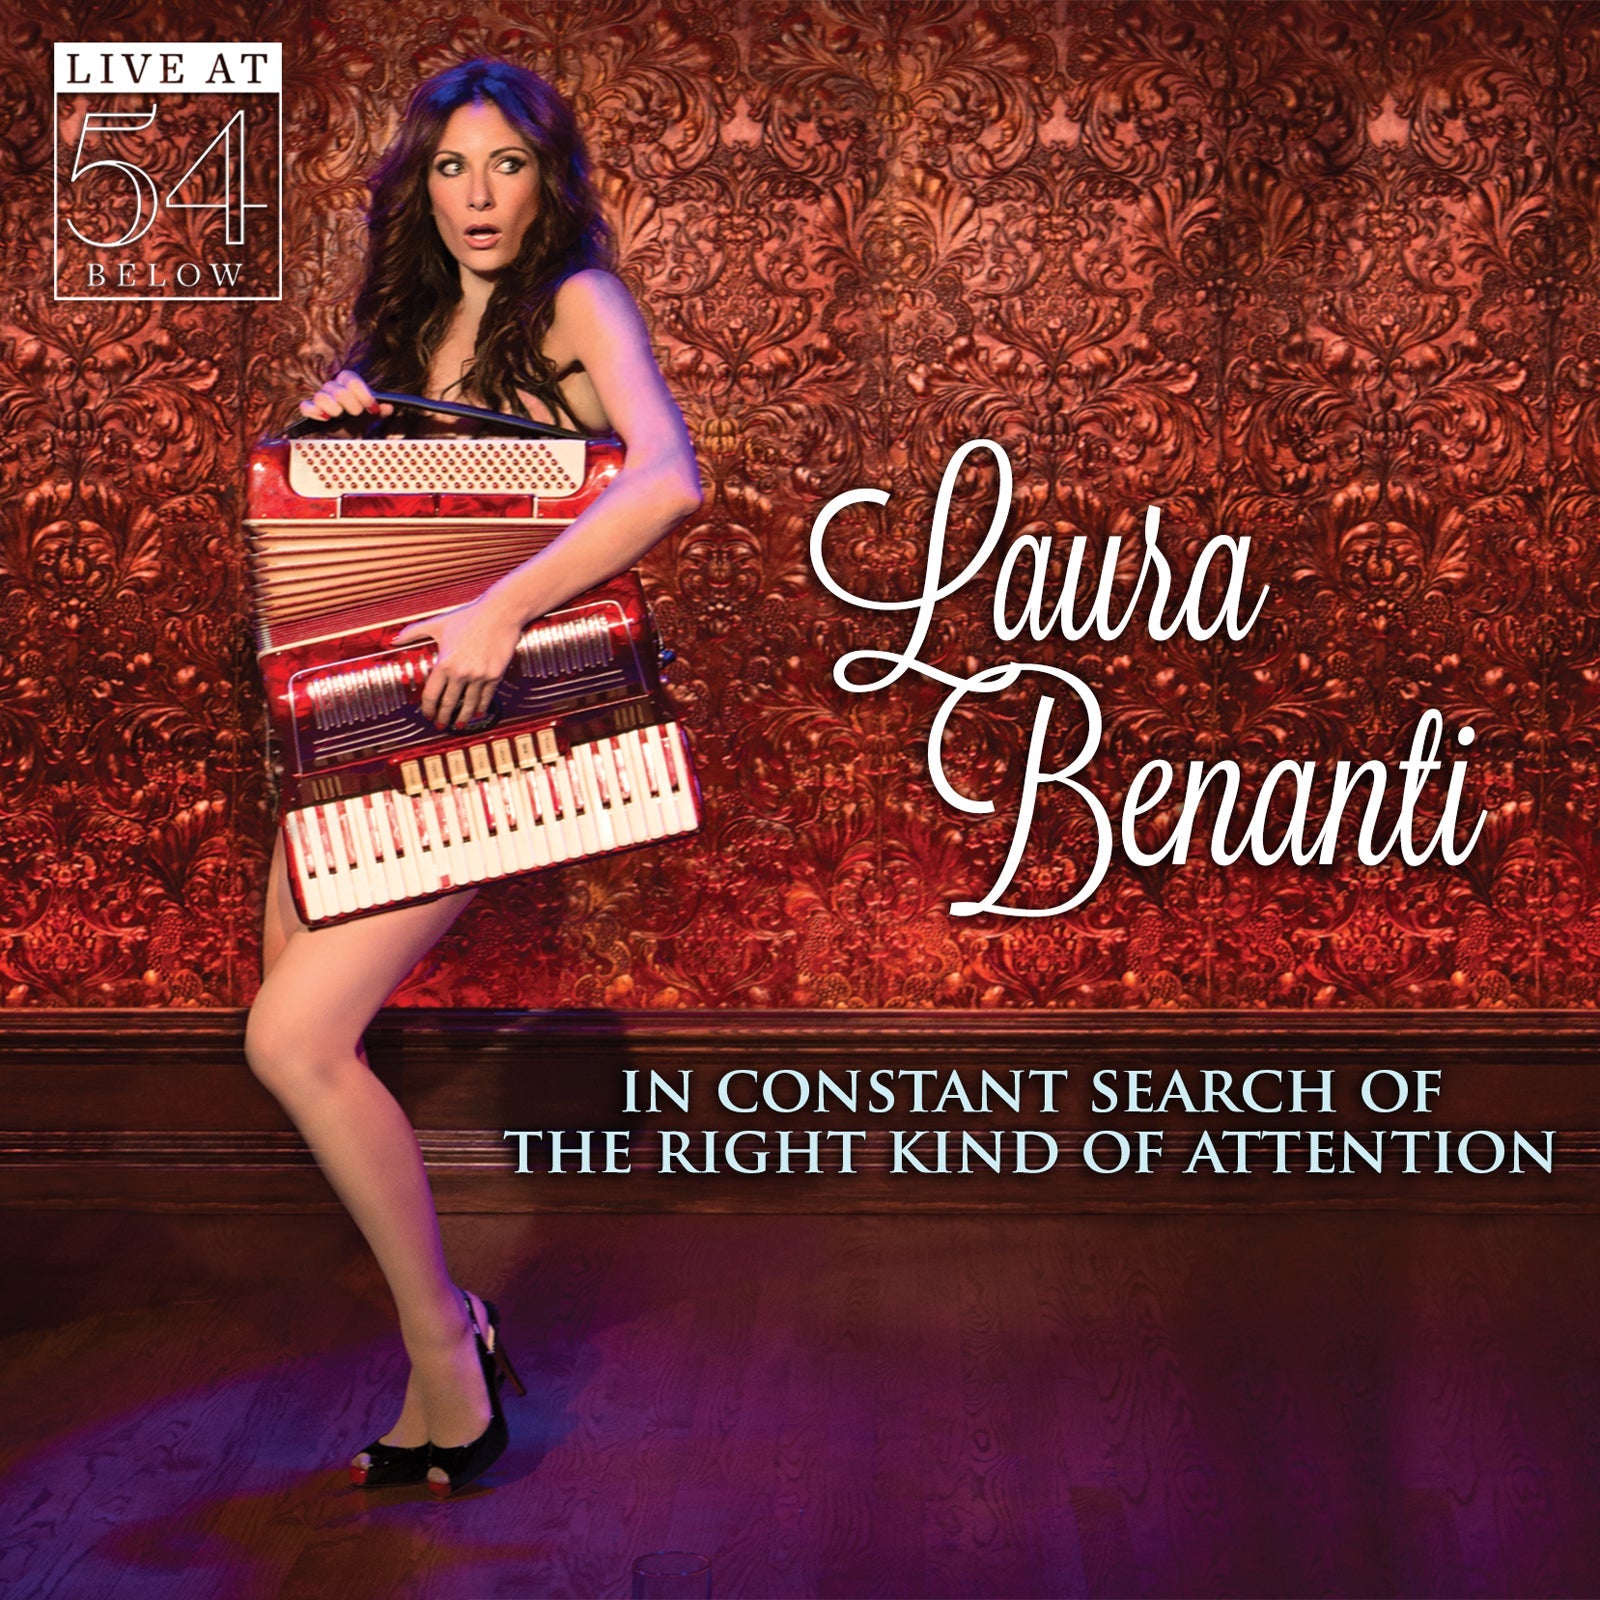 Laura Benanti: In Constant Search of the Right Kind of Attention - Live at 54 Below  [MP3]